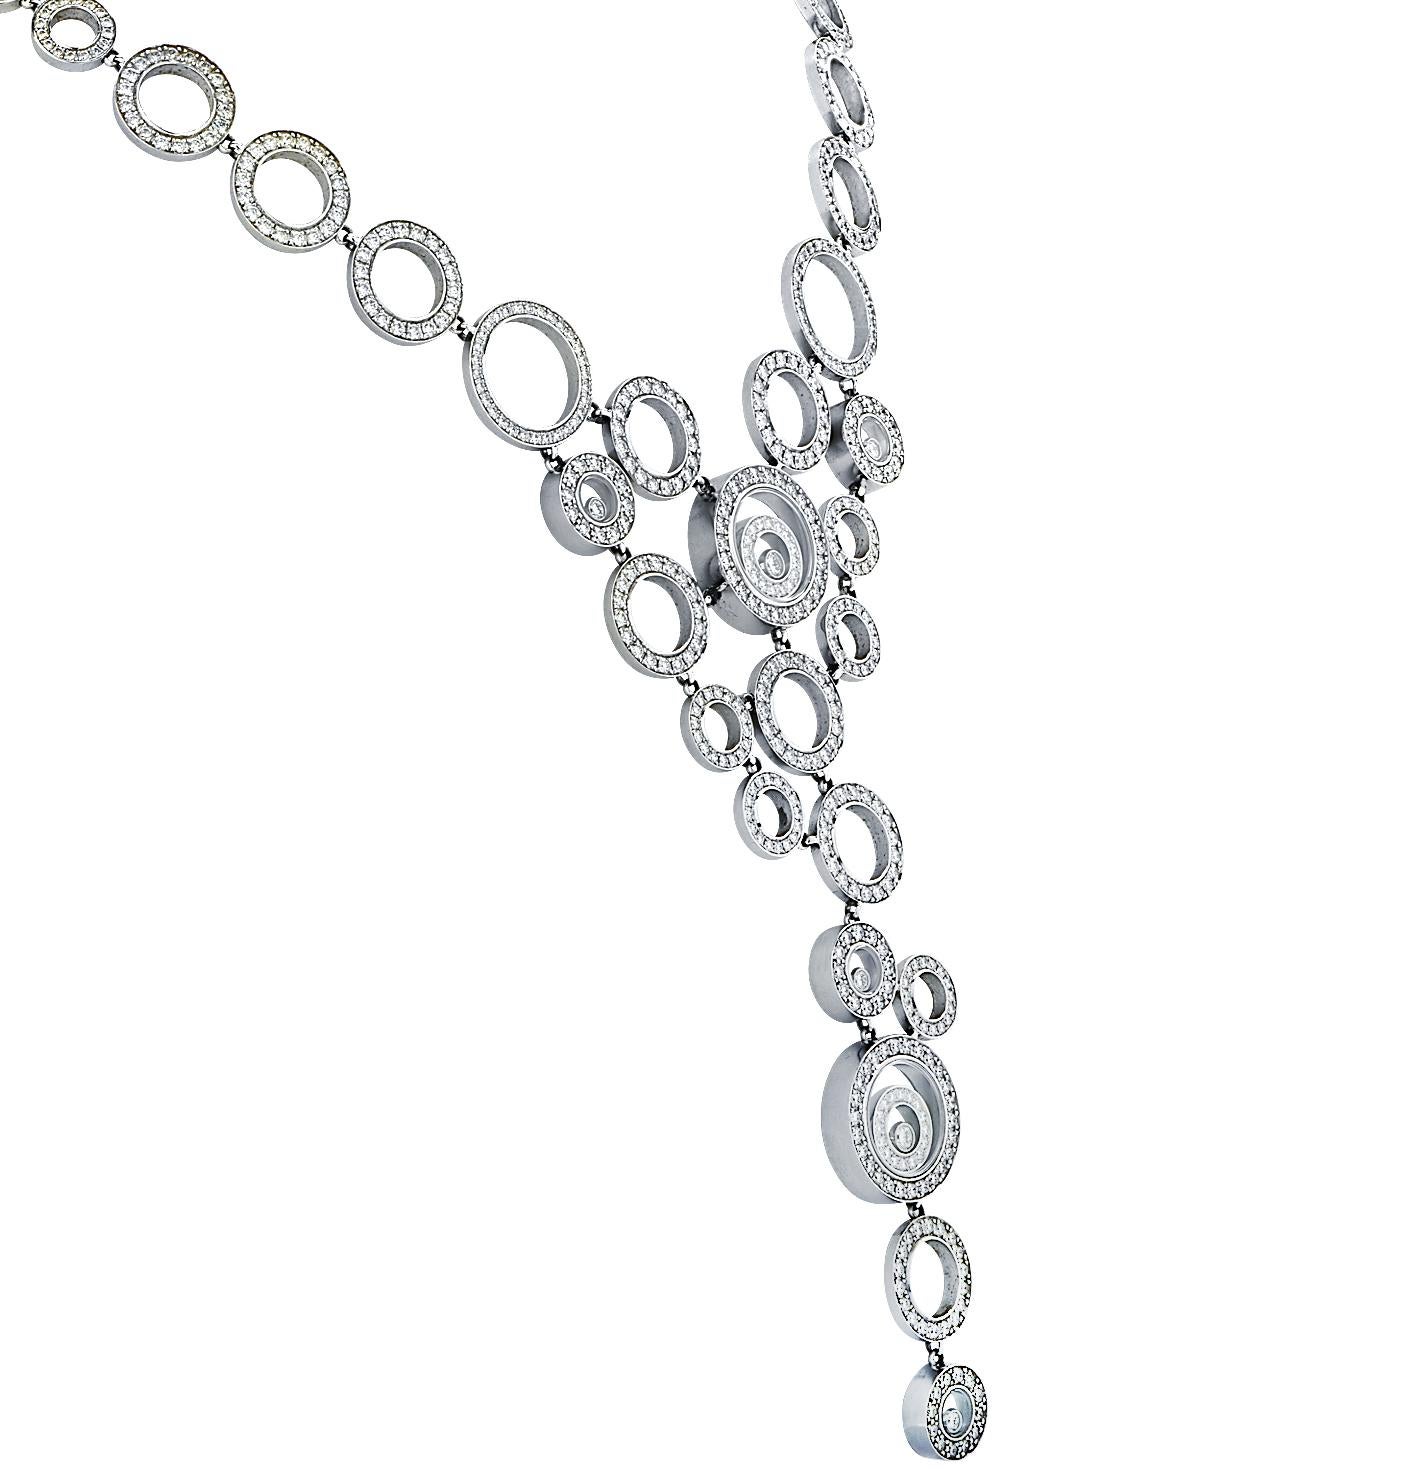 This mesmerizing diamond necklace from Chopard's iconic happy spirit collection, is crafted in 18 karat white gold, featuring 704 round brilliant cut diamonds, weighing approximately 10.88 carats, F color, VS clarity. With a joyful design of solid